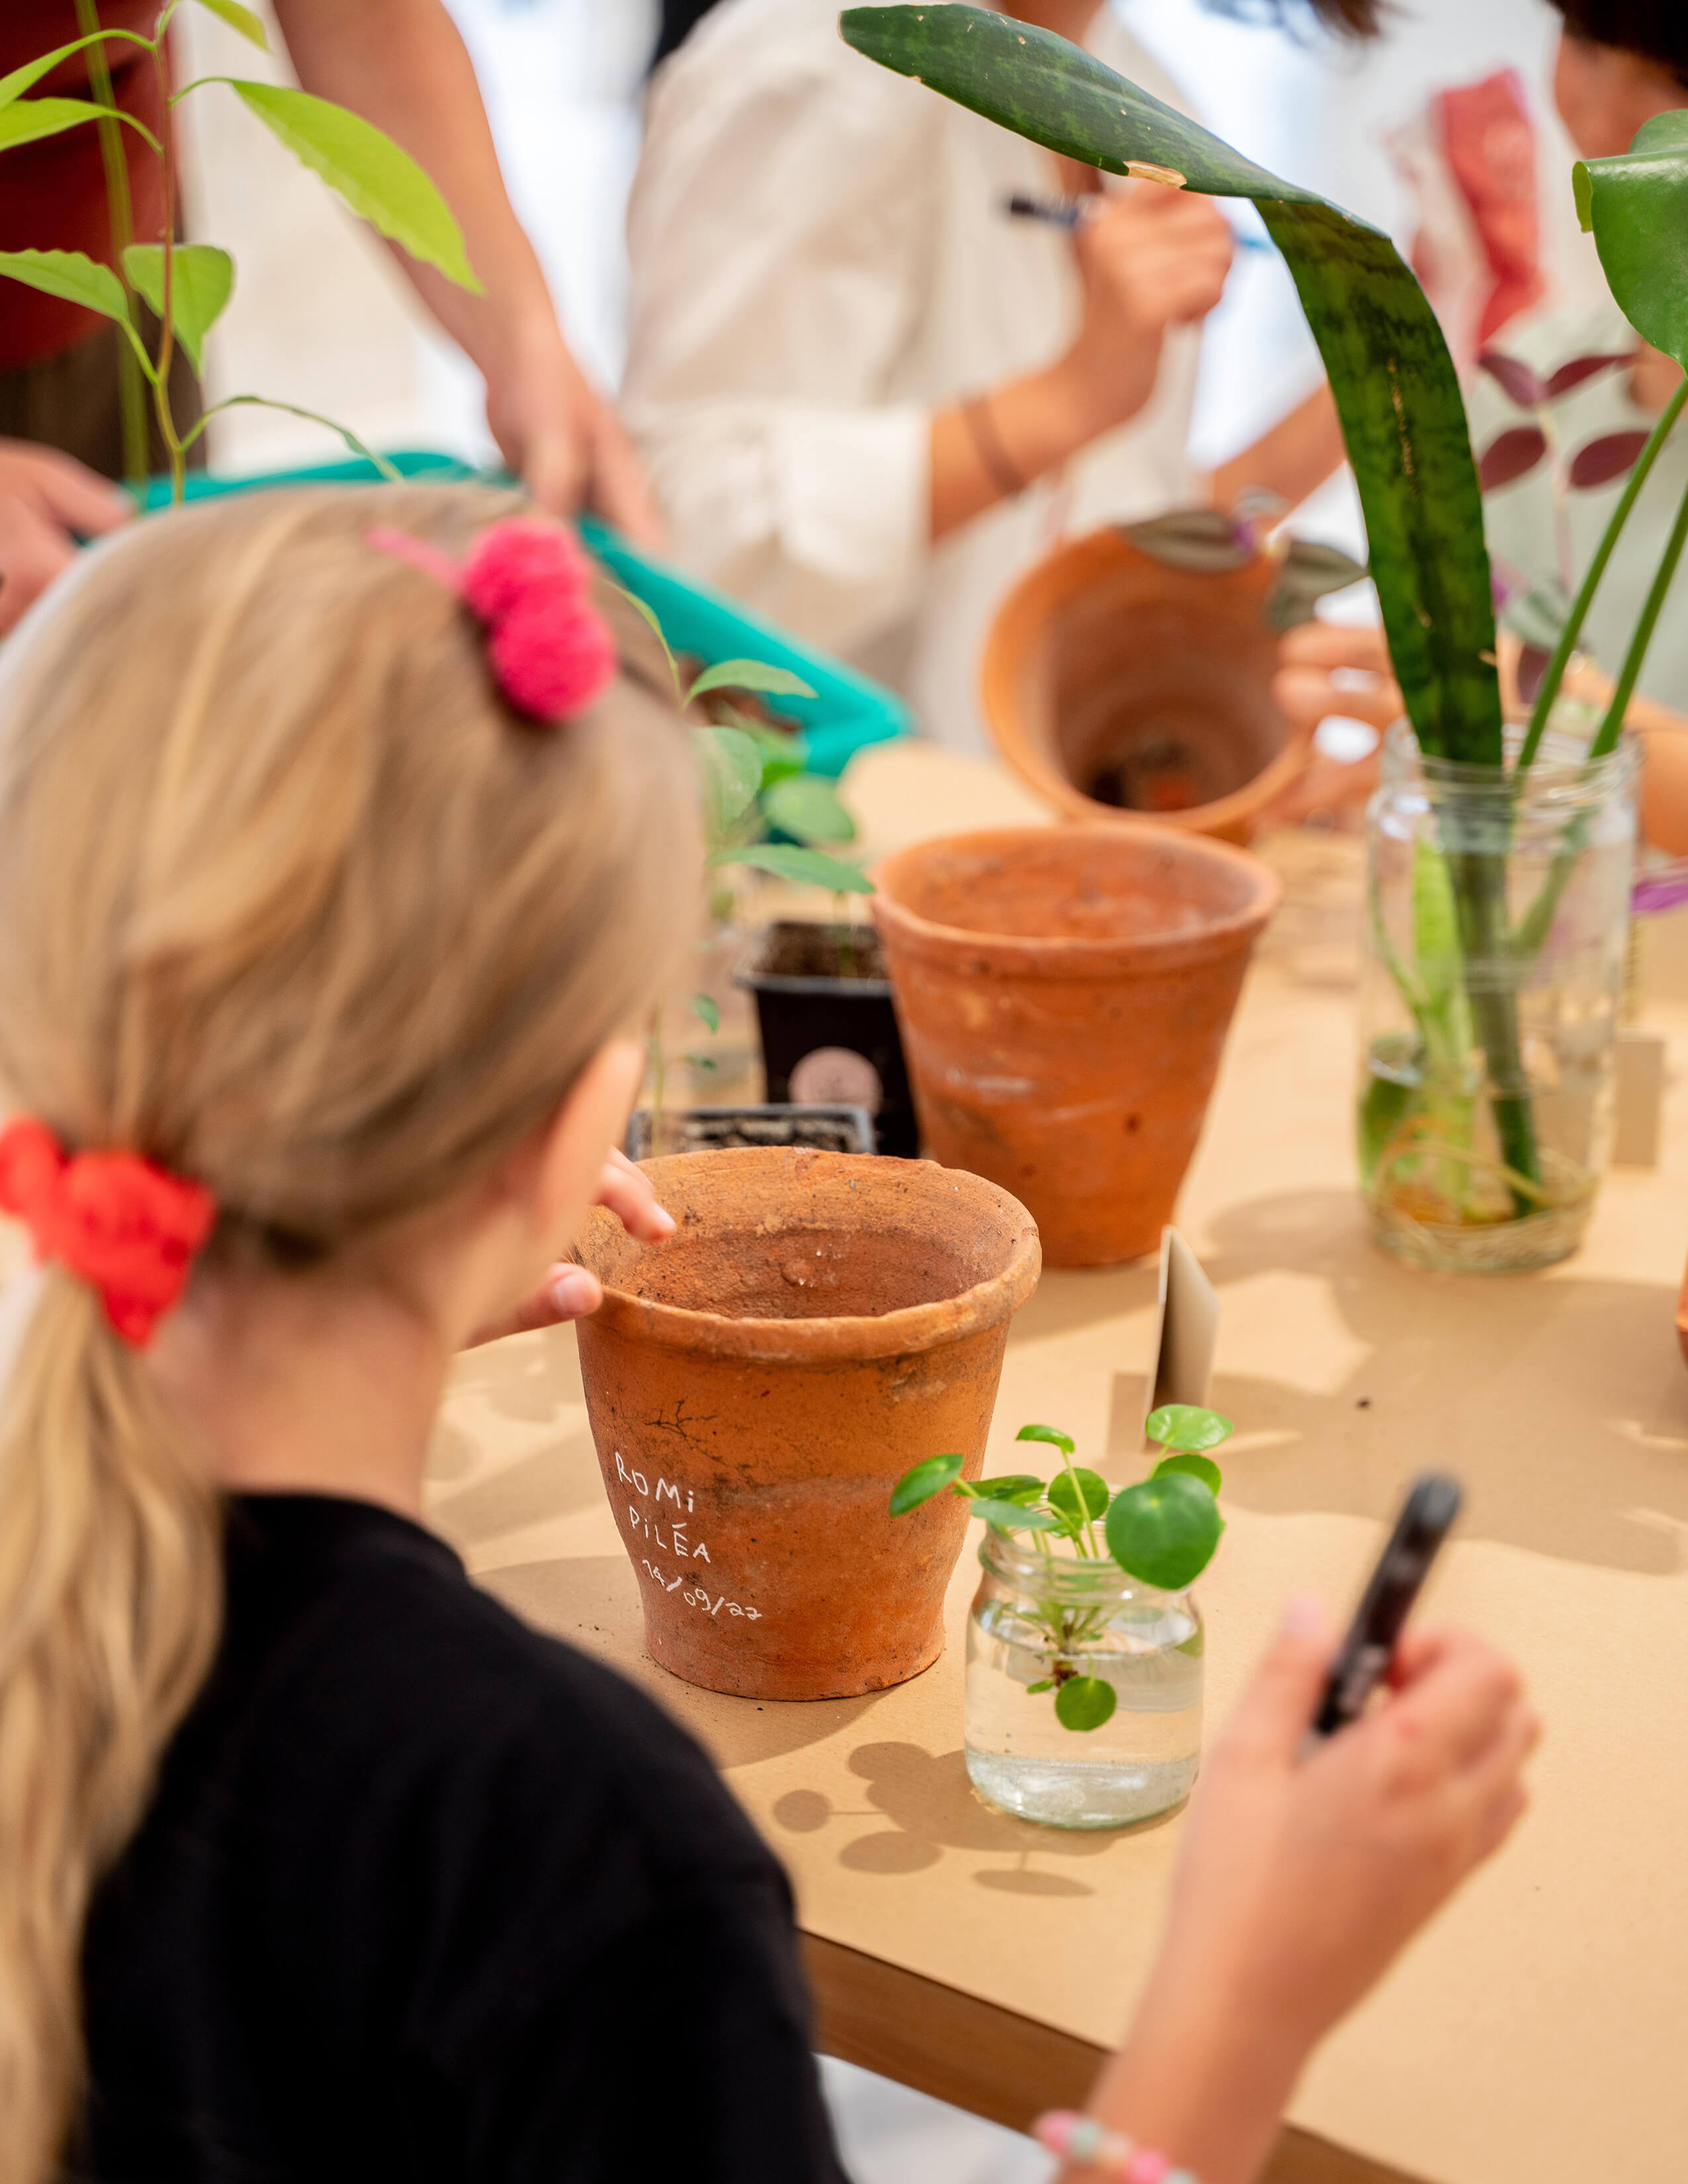 A kid with a red hair-tie holding a pen in her hand is white terracotta pots and plants are growing in glass bottles on the table.